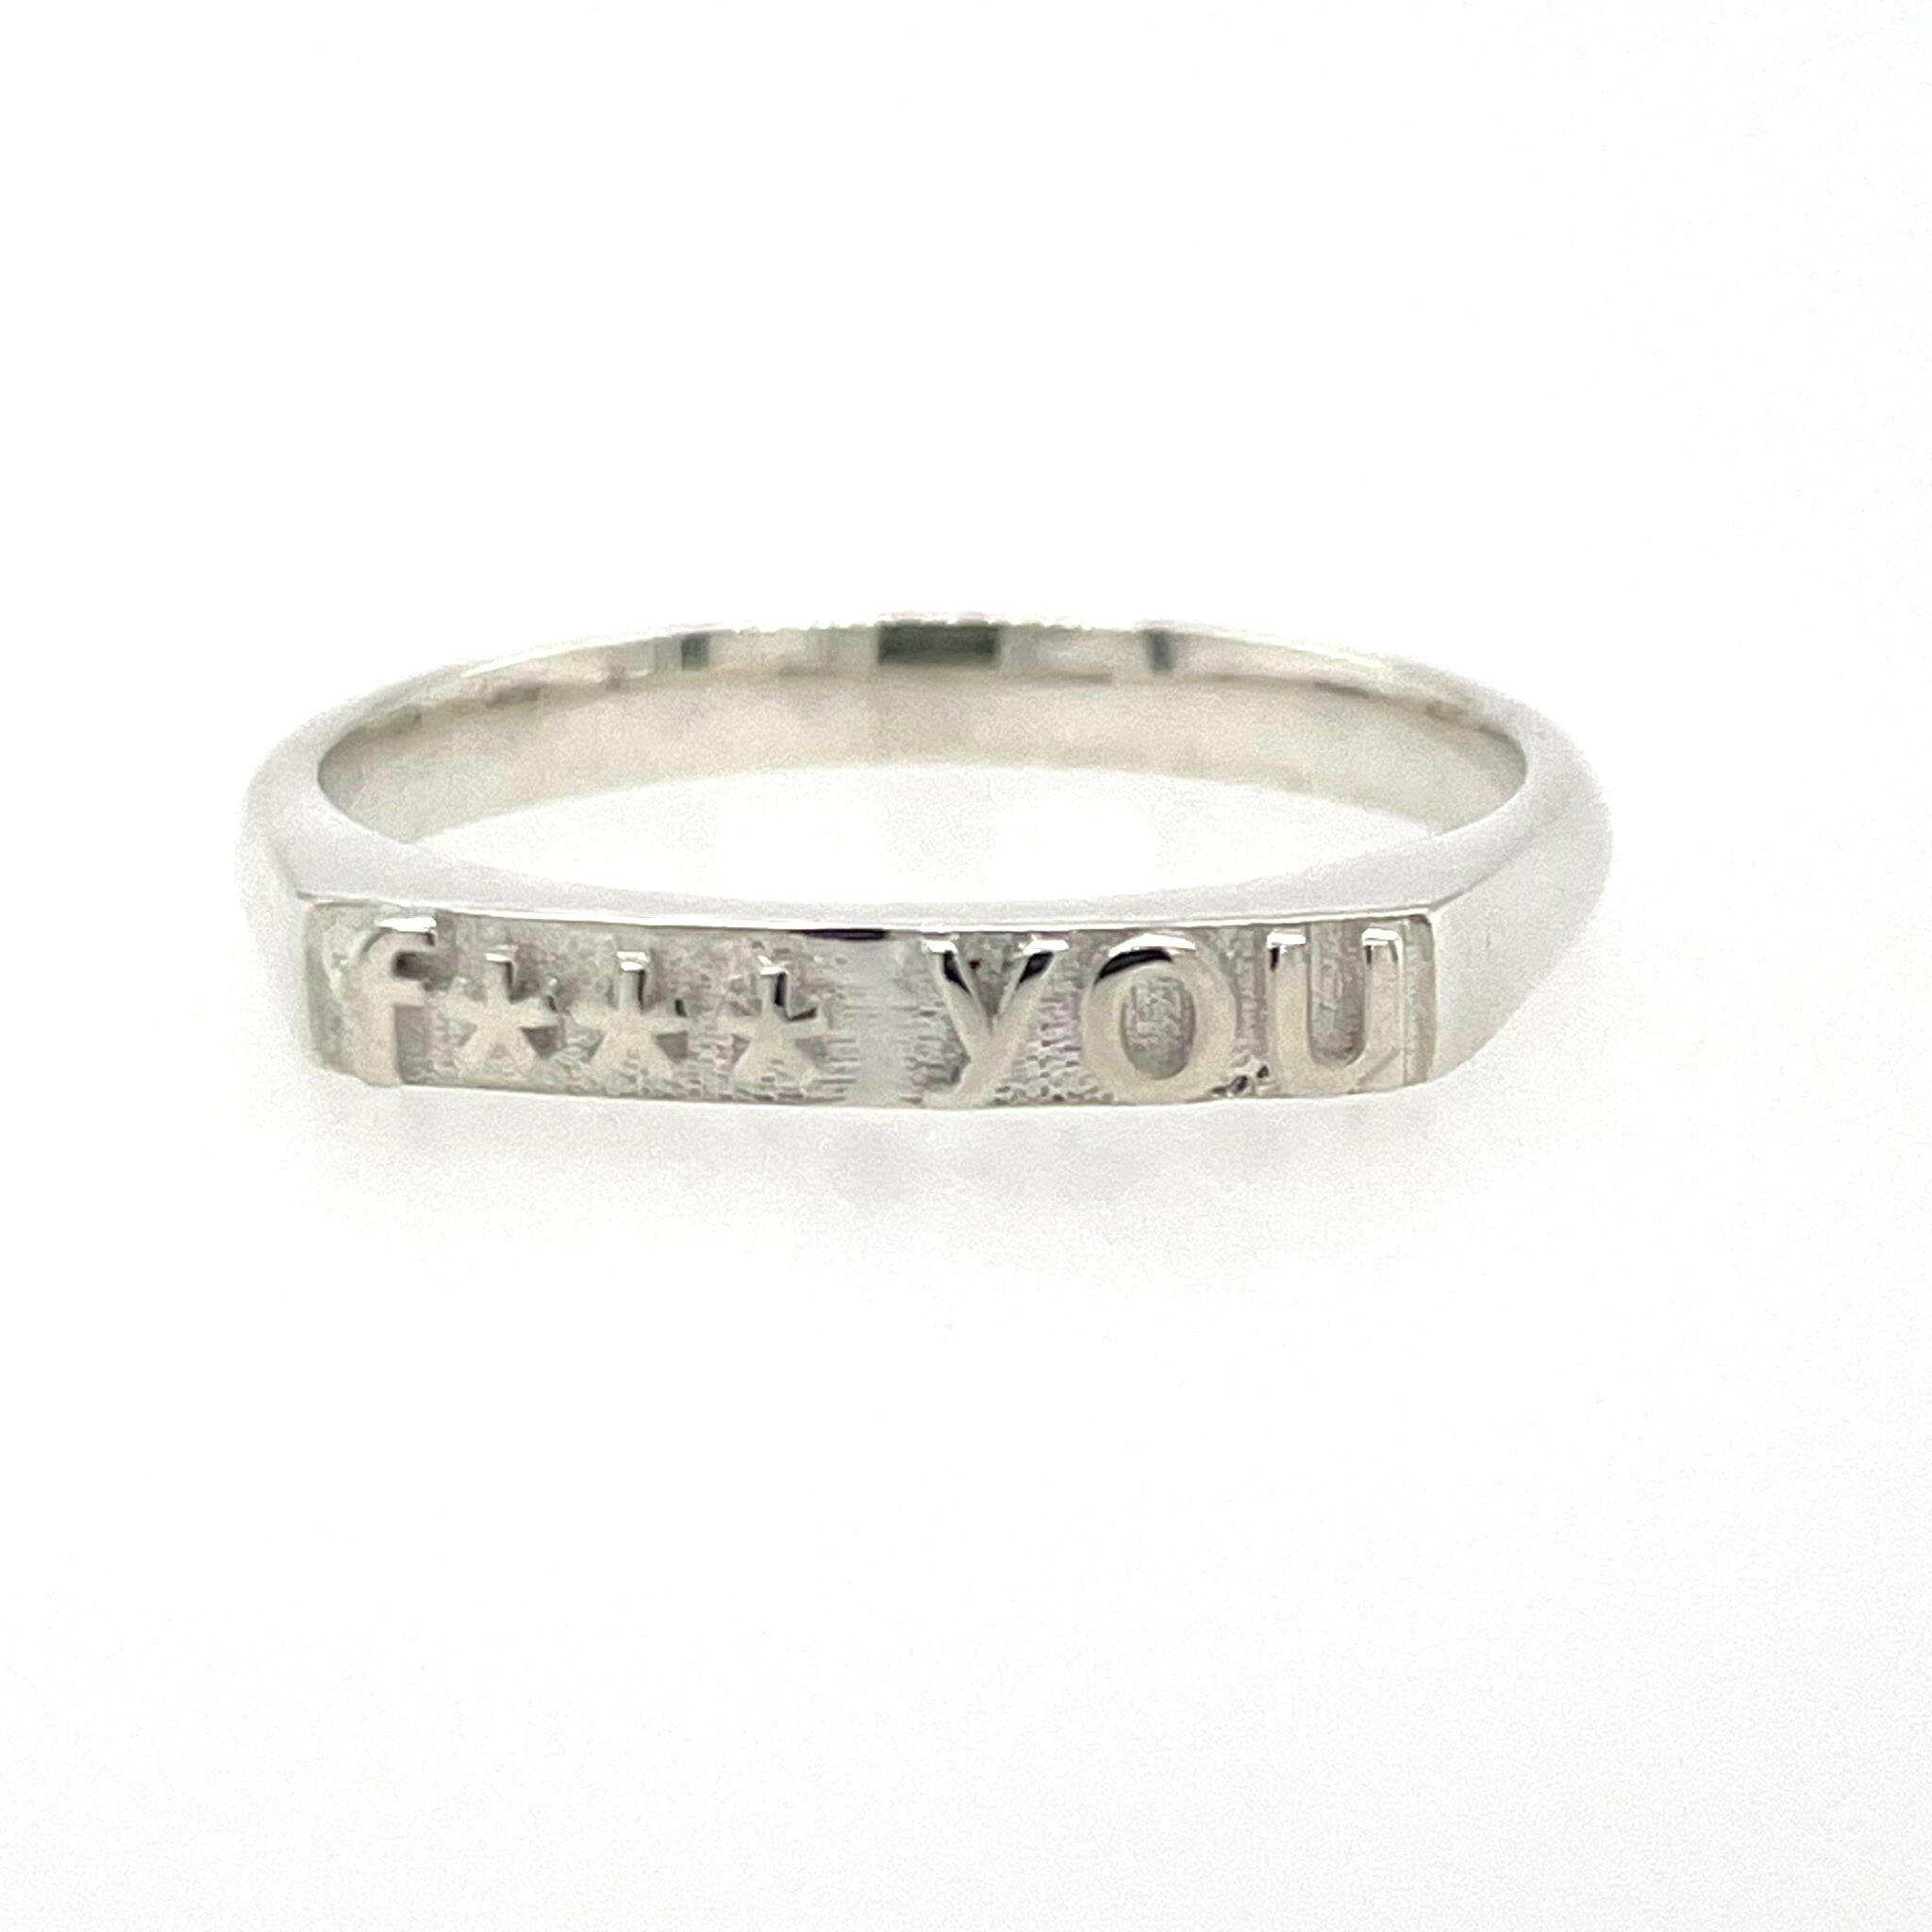 front view of ring in 14 karat white gold with text that reads "fuck you" but with 4 asterisks to censor fuck, therefore says "f*** you"